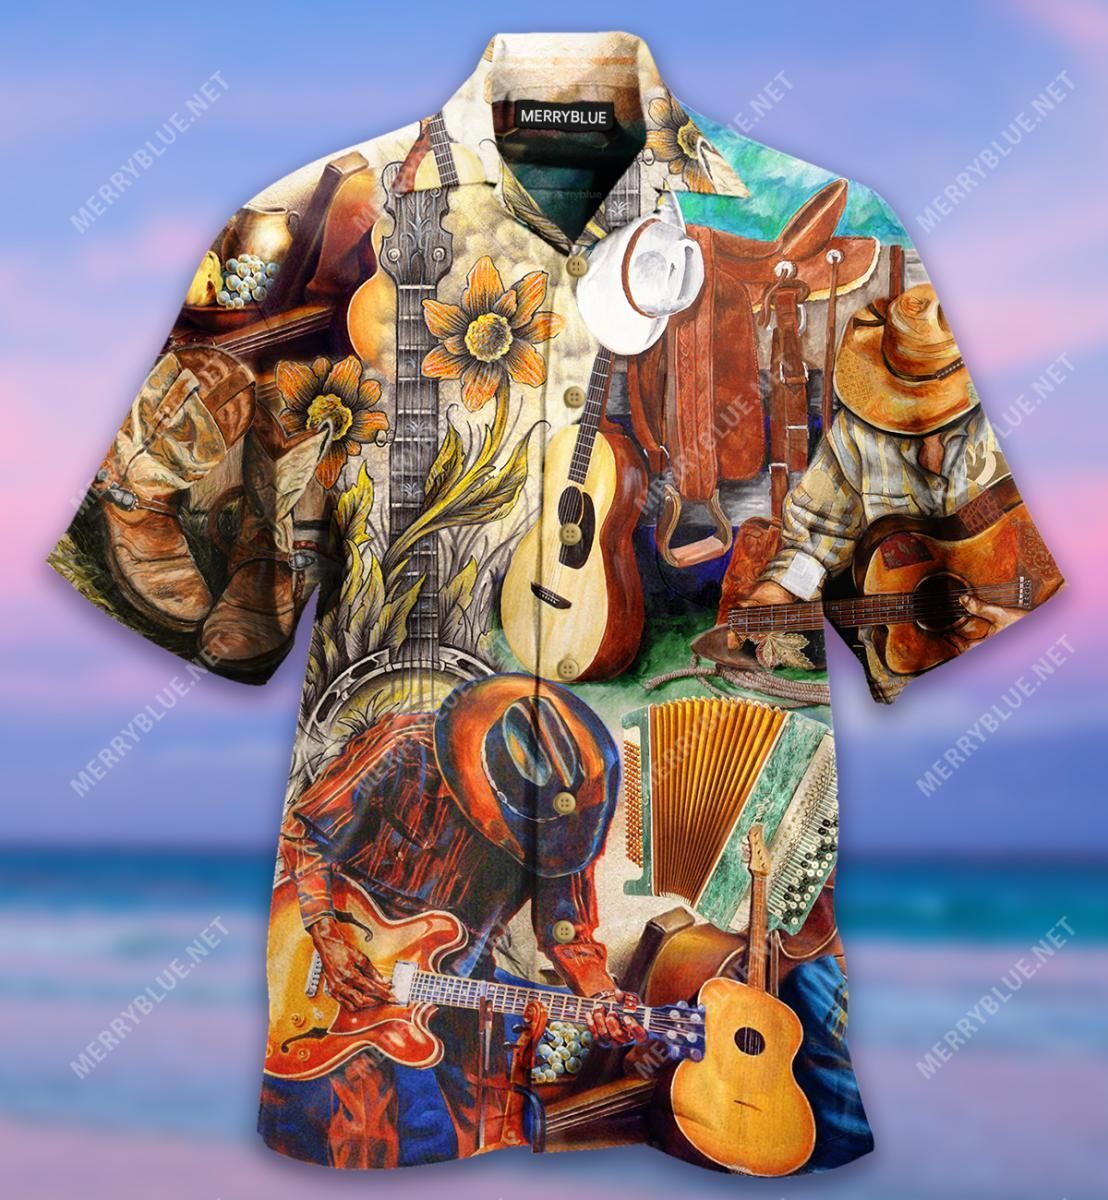 We Didn’T Get By Being Stupid Us Veterans Aloha Hawaiian Shirt Colorful Short Sleeve Summer Beach Casual Shirt For Men And Women